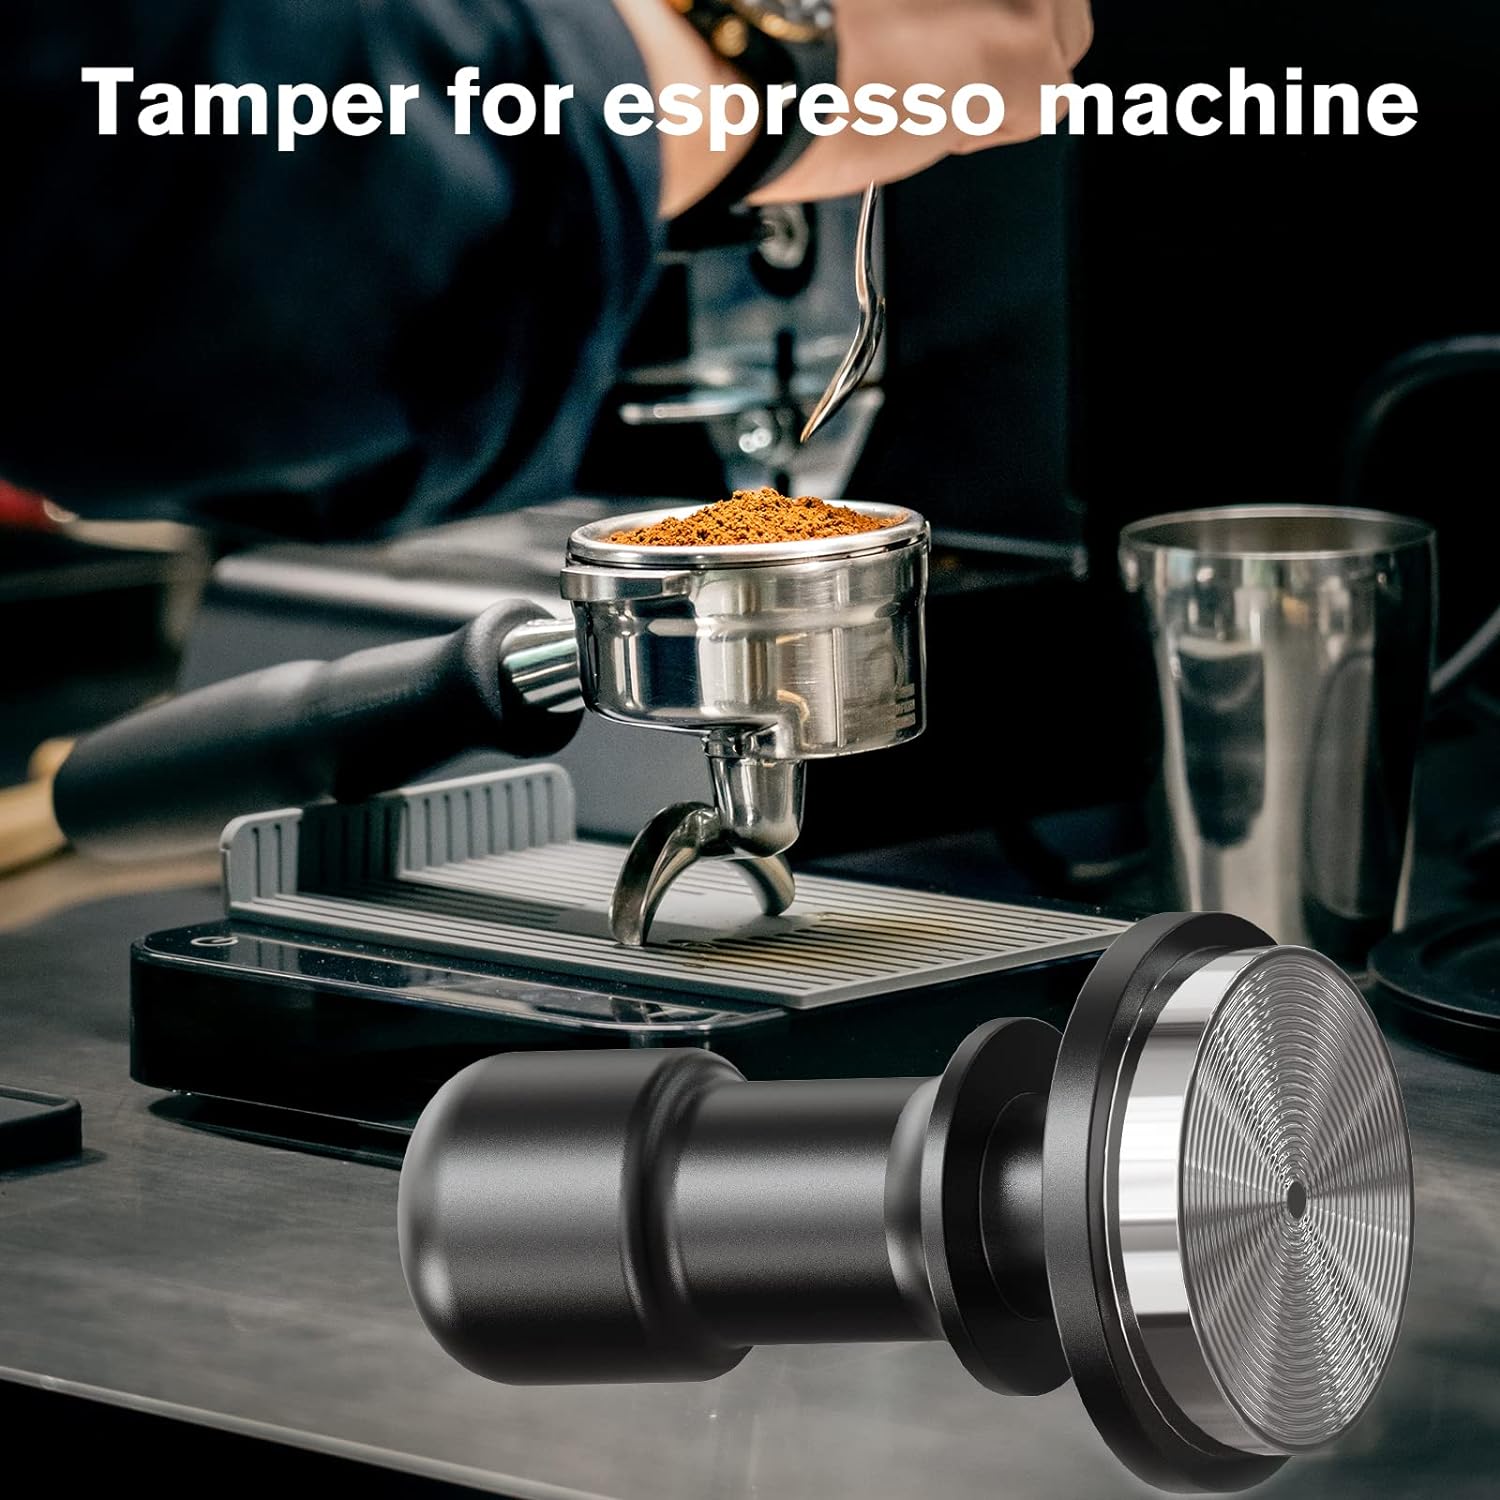 PUSEE 53mm Espresso Tamper,Premium 30lb Calibrated Espresso Tamper Upgrade Coffee Tamper with Spring Loaded,100% Stainless Steel Grou